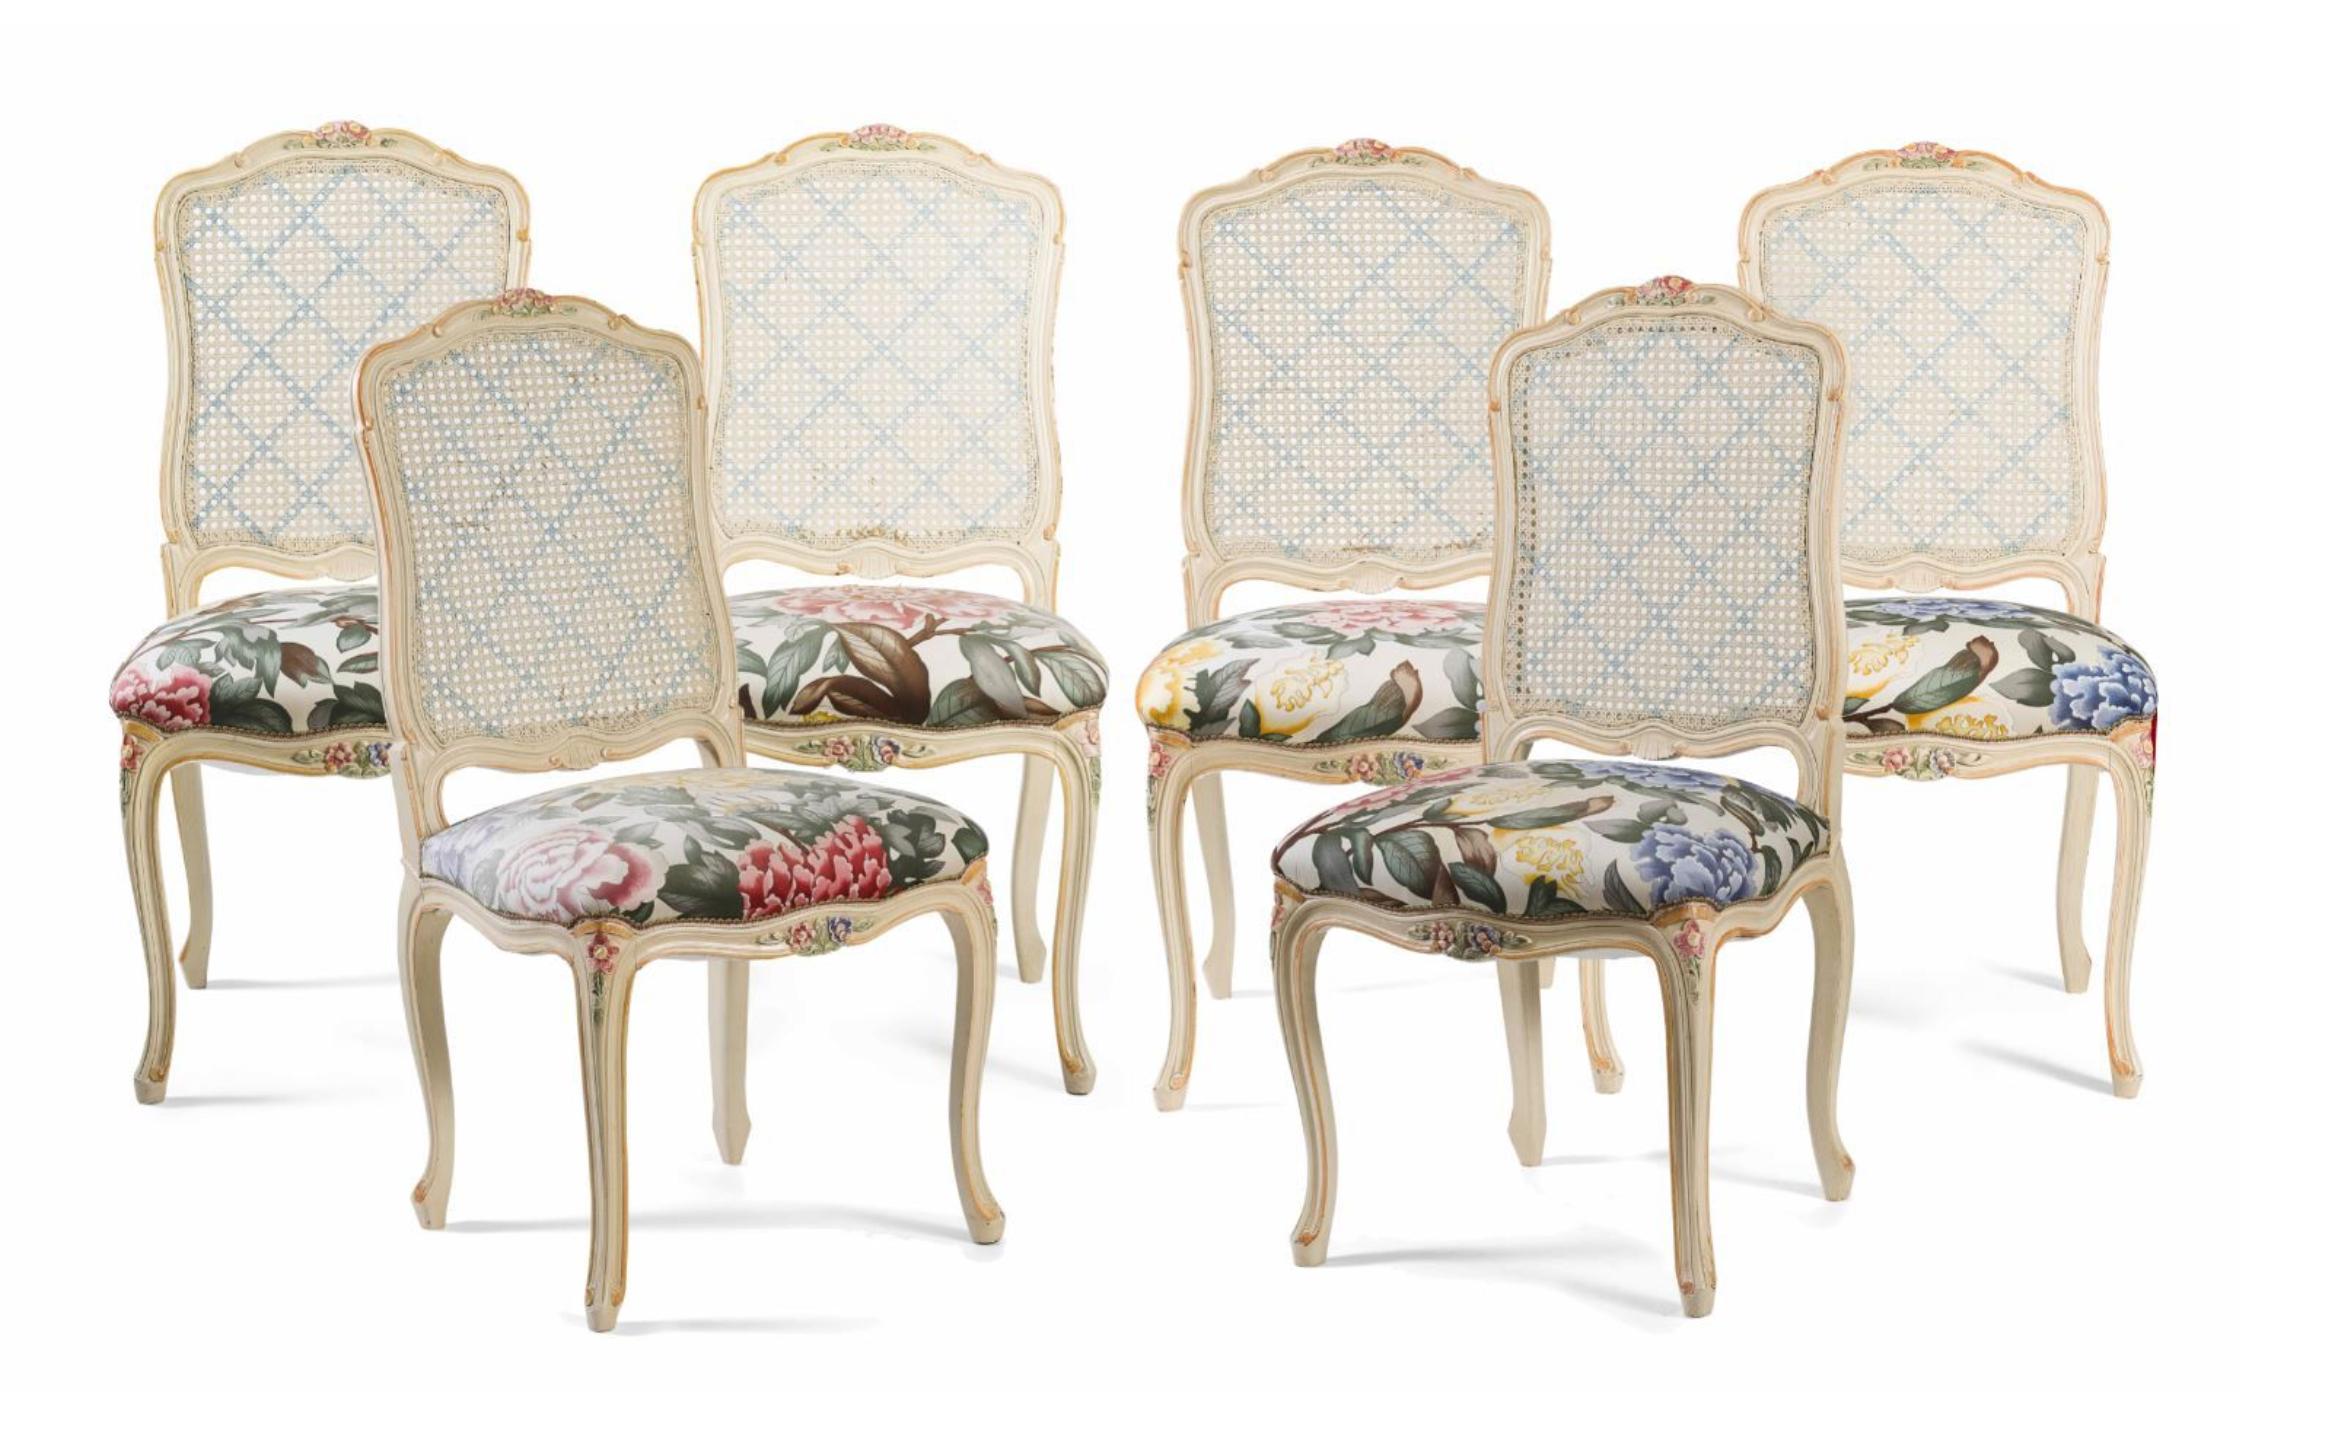 Hand-Carved 19th Century French Hand Carved and Painted Dining Chairs in Louis XV Style